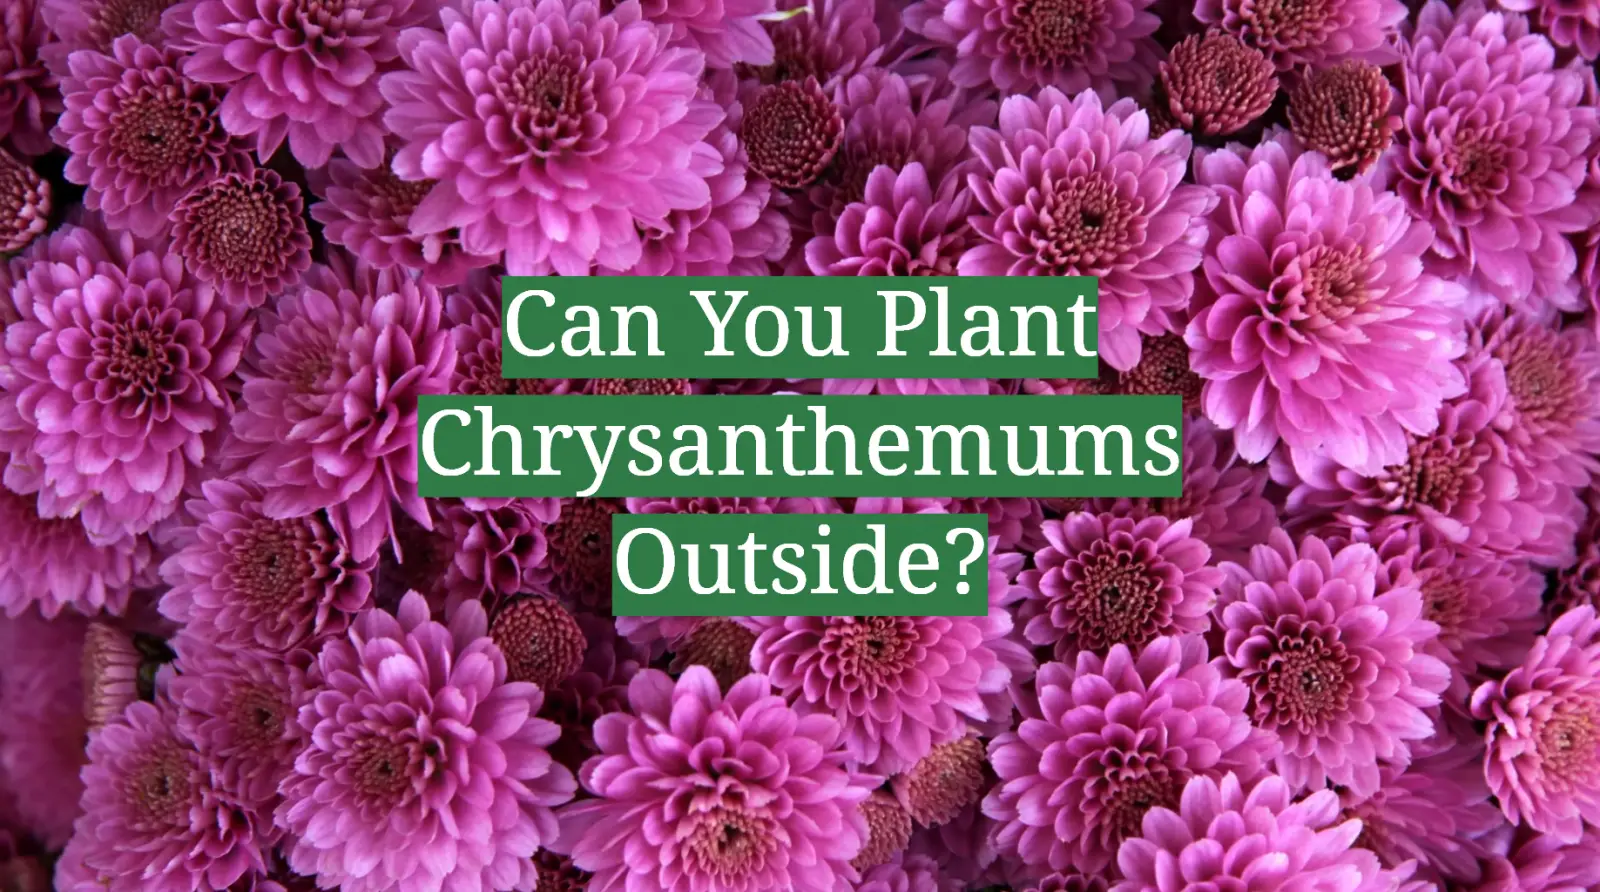 Can You Plant Chrysanthemums Outside?